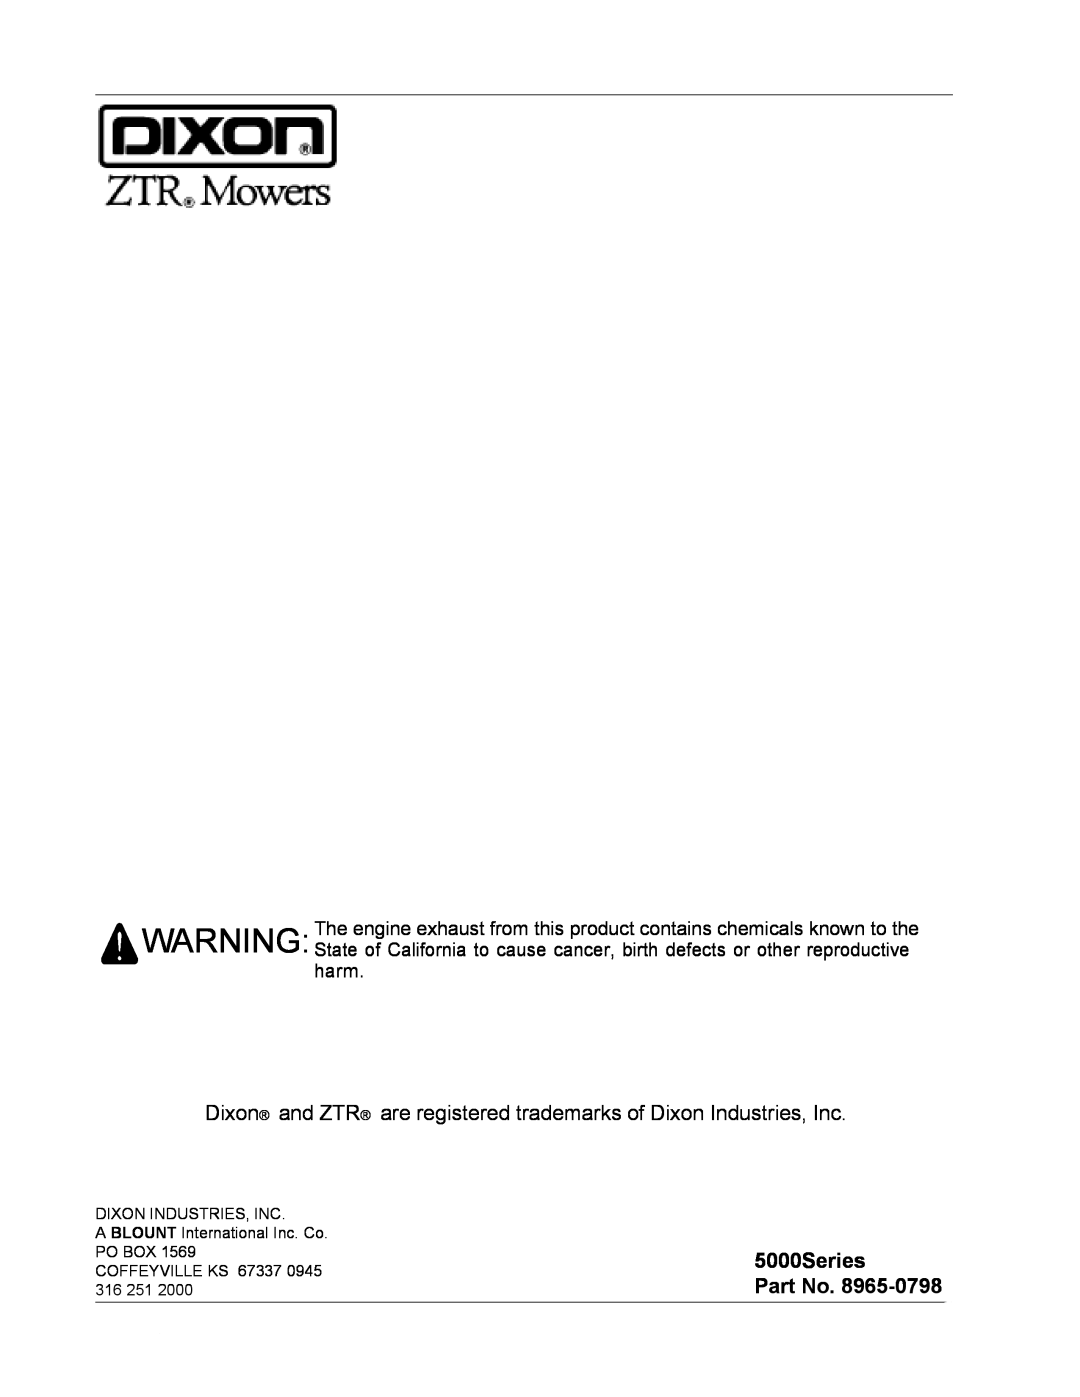 Dixon ZTR 5022, ZTR 5017 manual Dixon and ZTR, are registered trademarks of Dixon Industries, Inc, 5000Series 